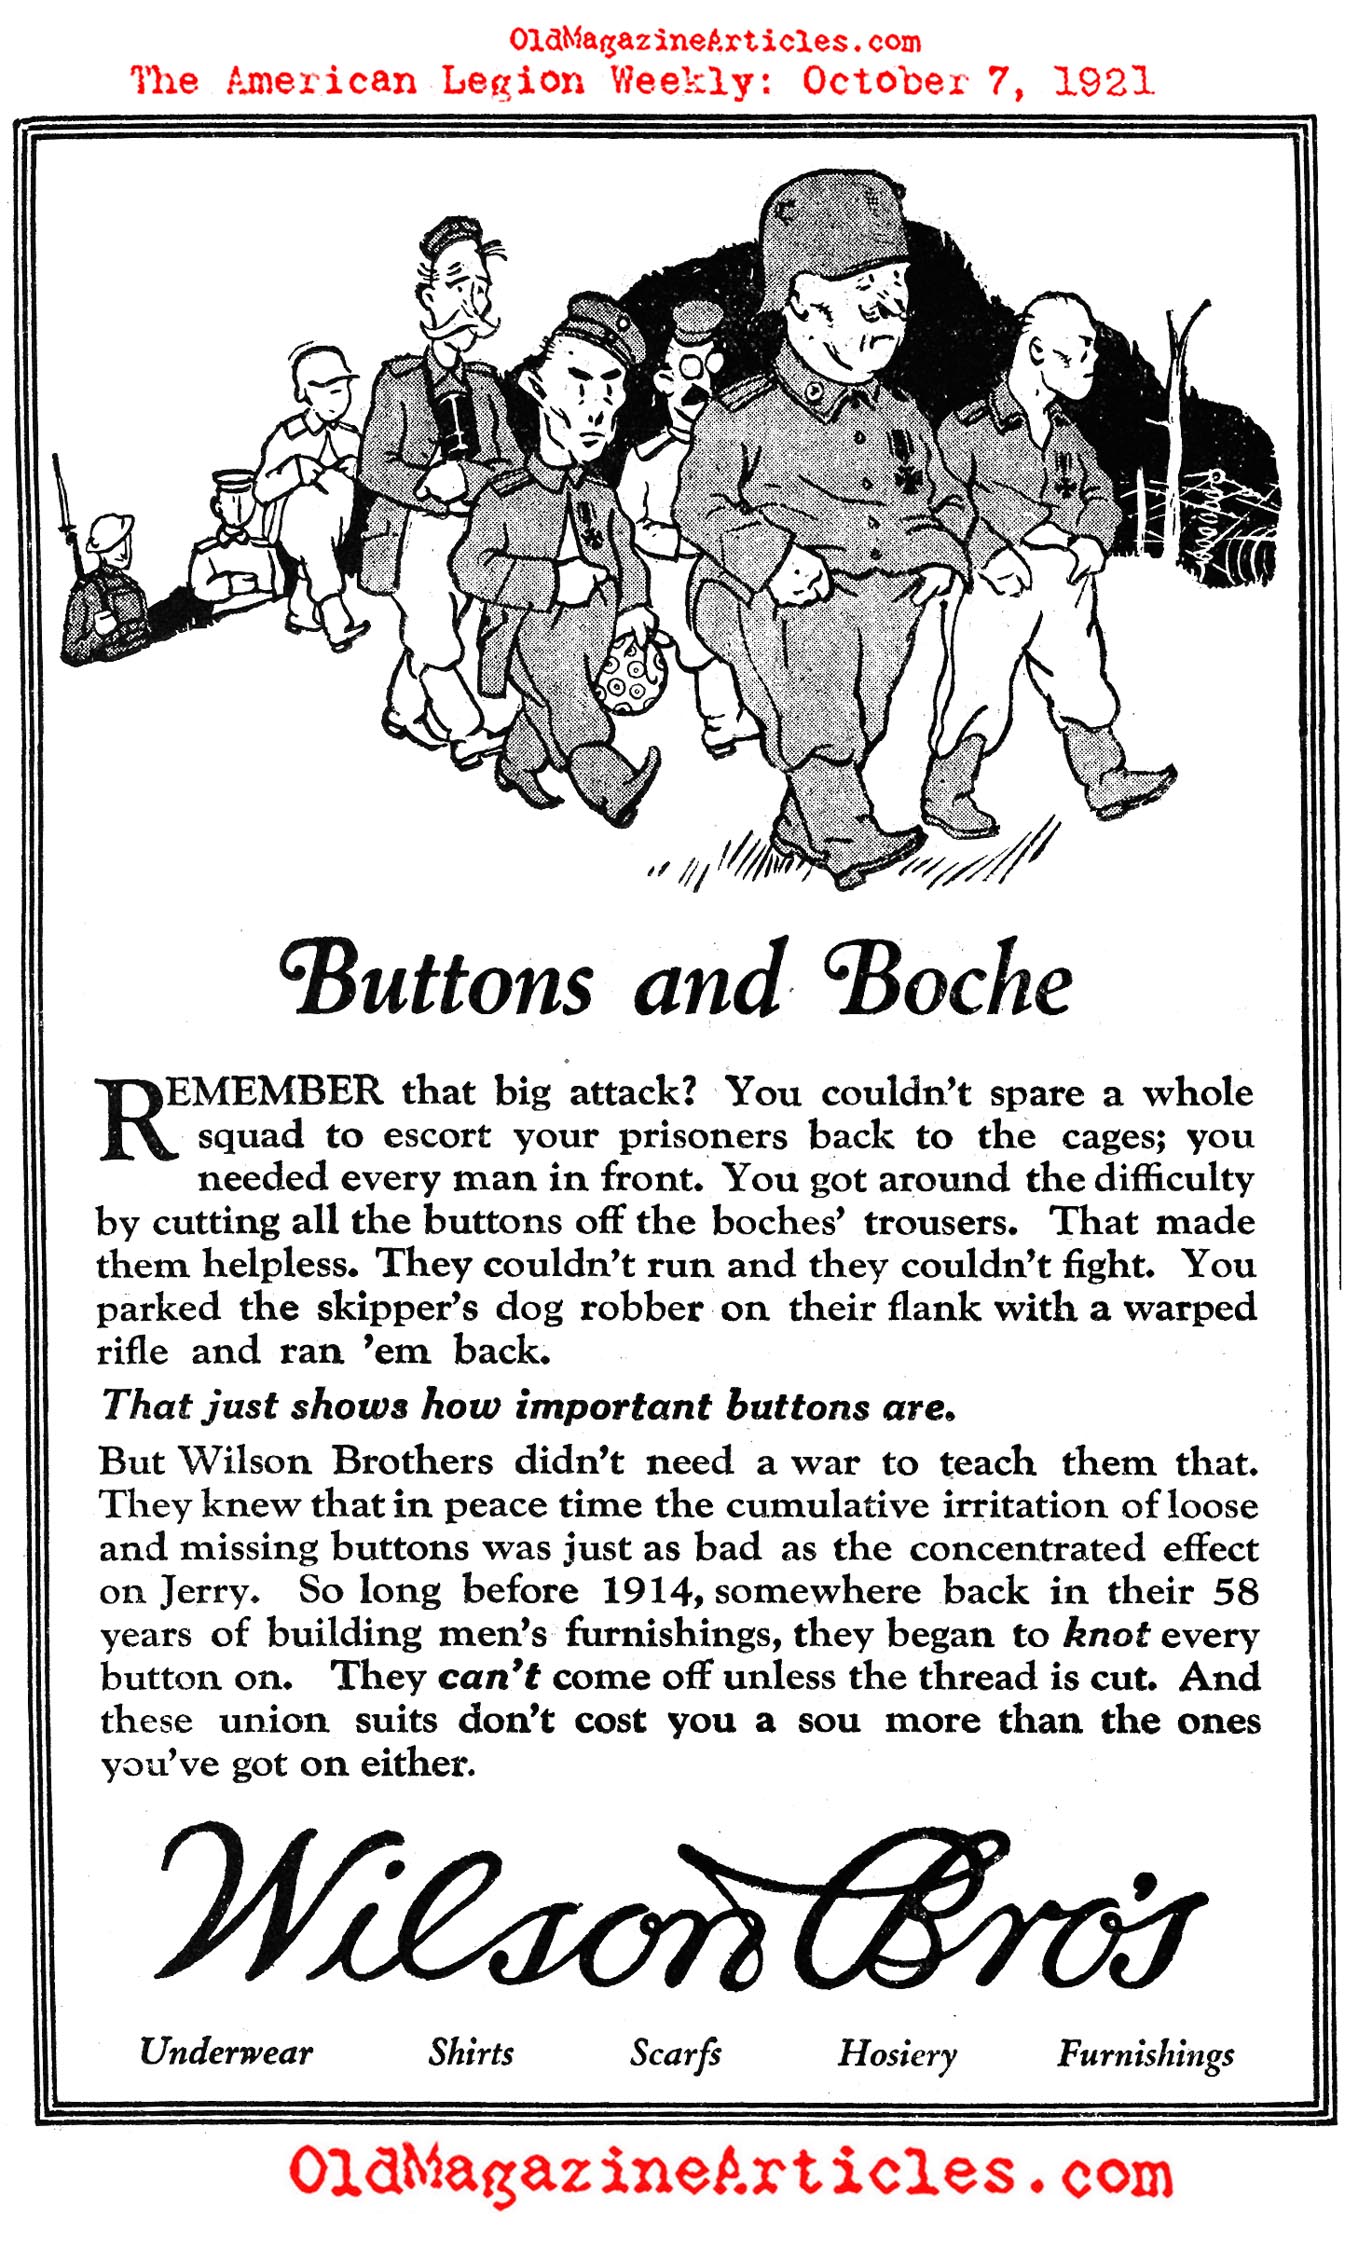 A Clever Way to Escort Prisoners... (American Legion Weekly, 1921)